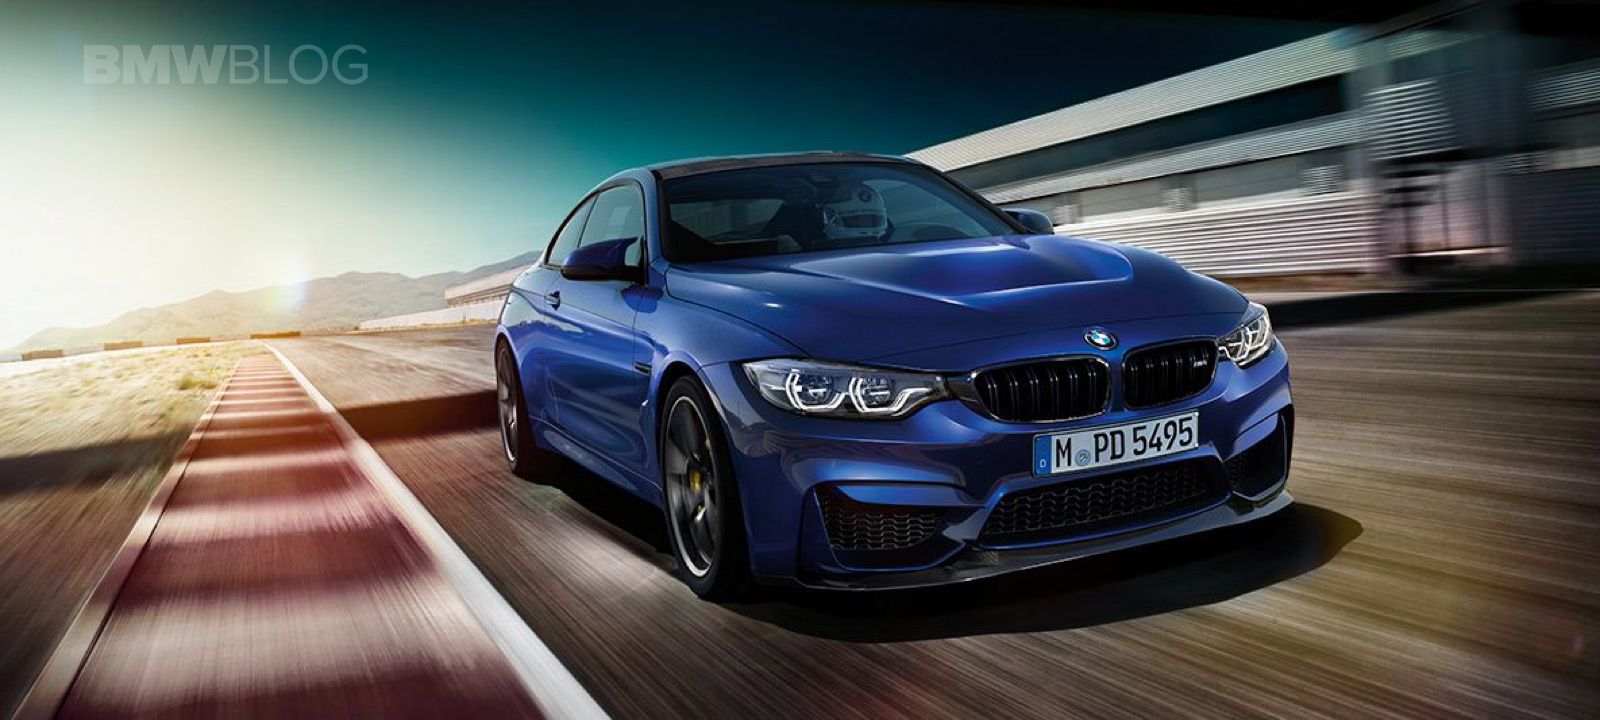 BMW M4 CS: Limited to approx. 300 units in Germany